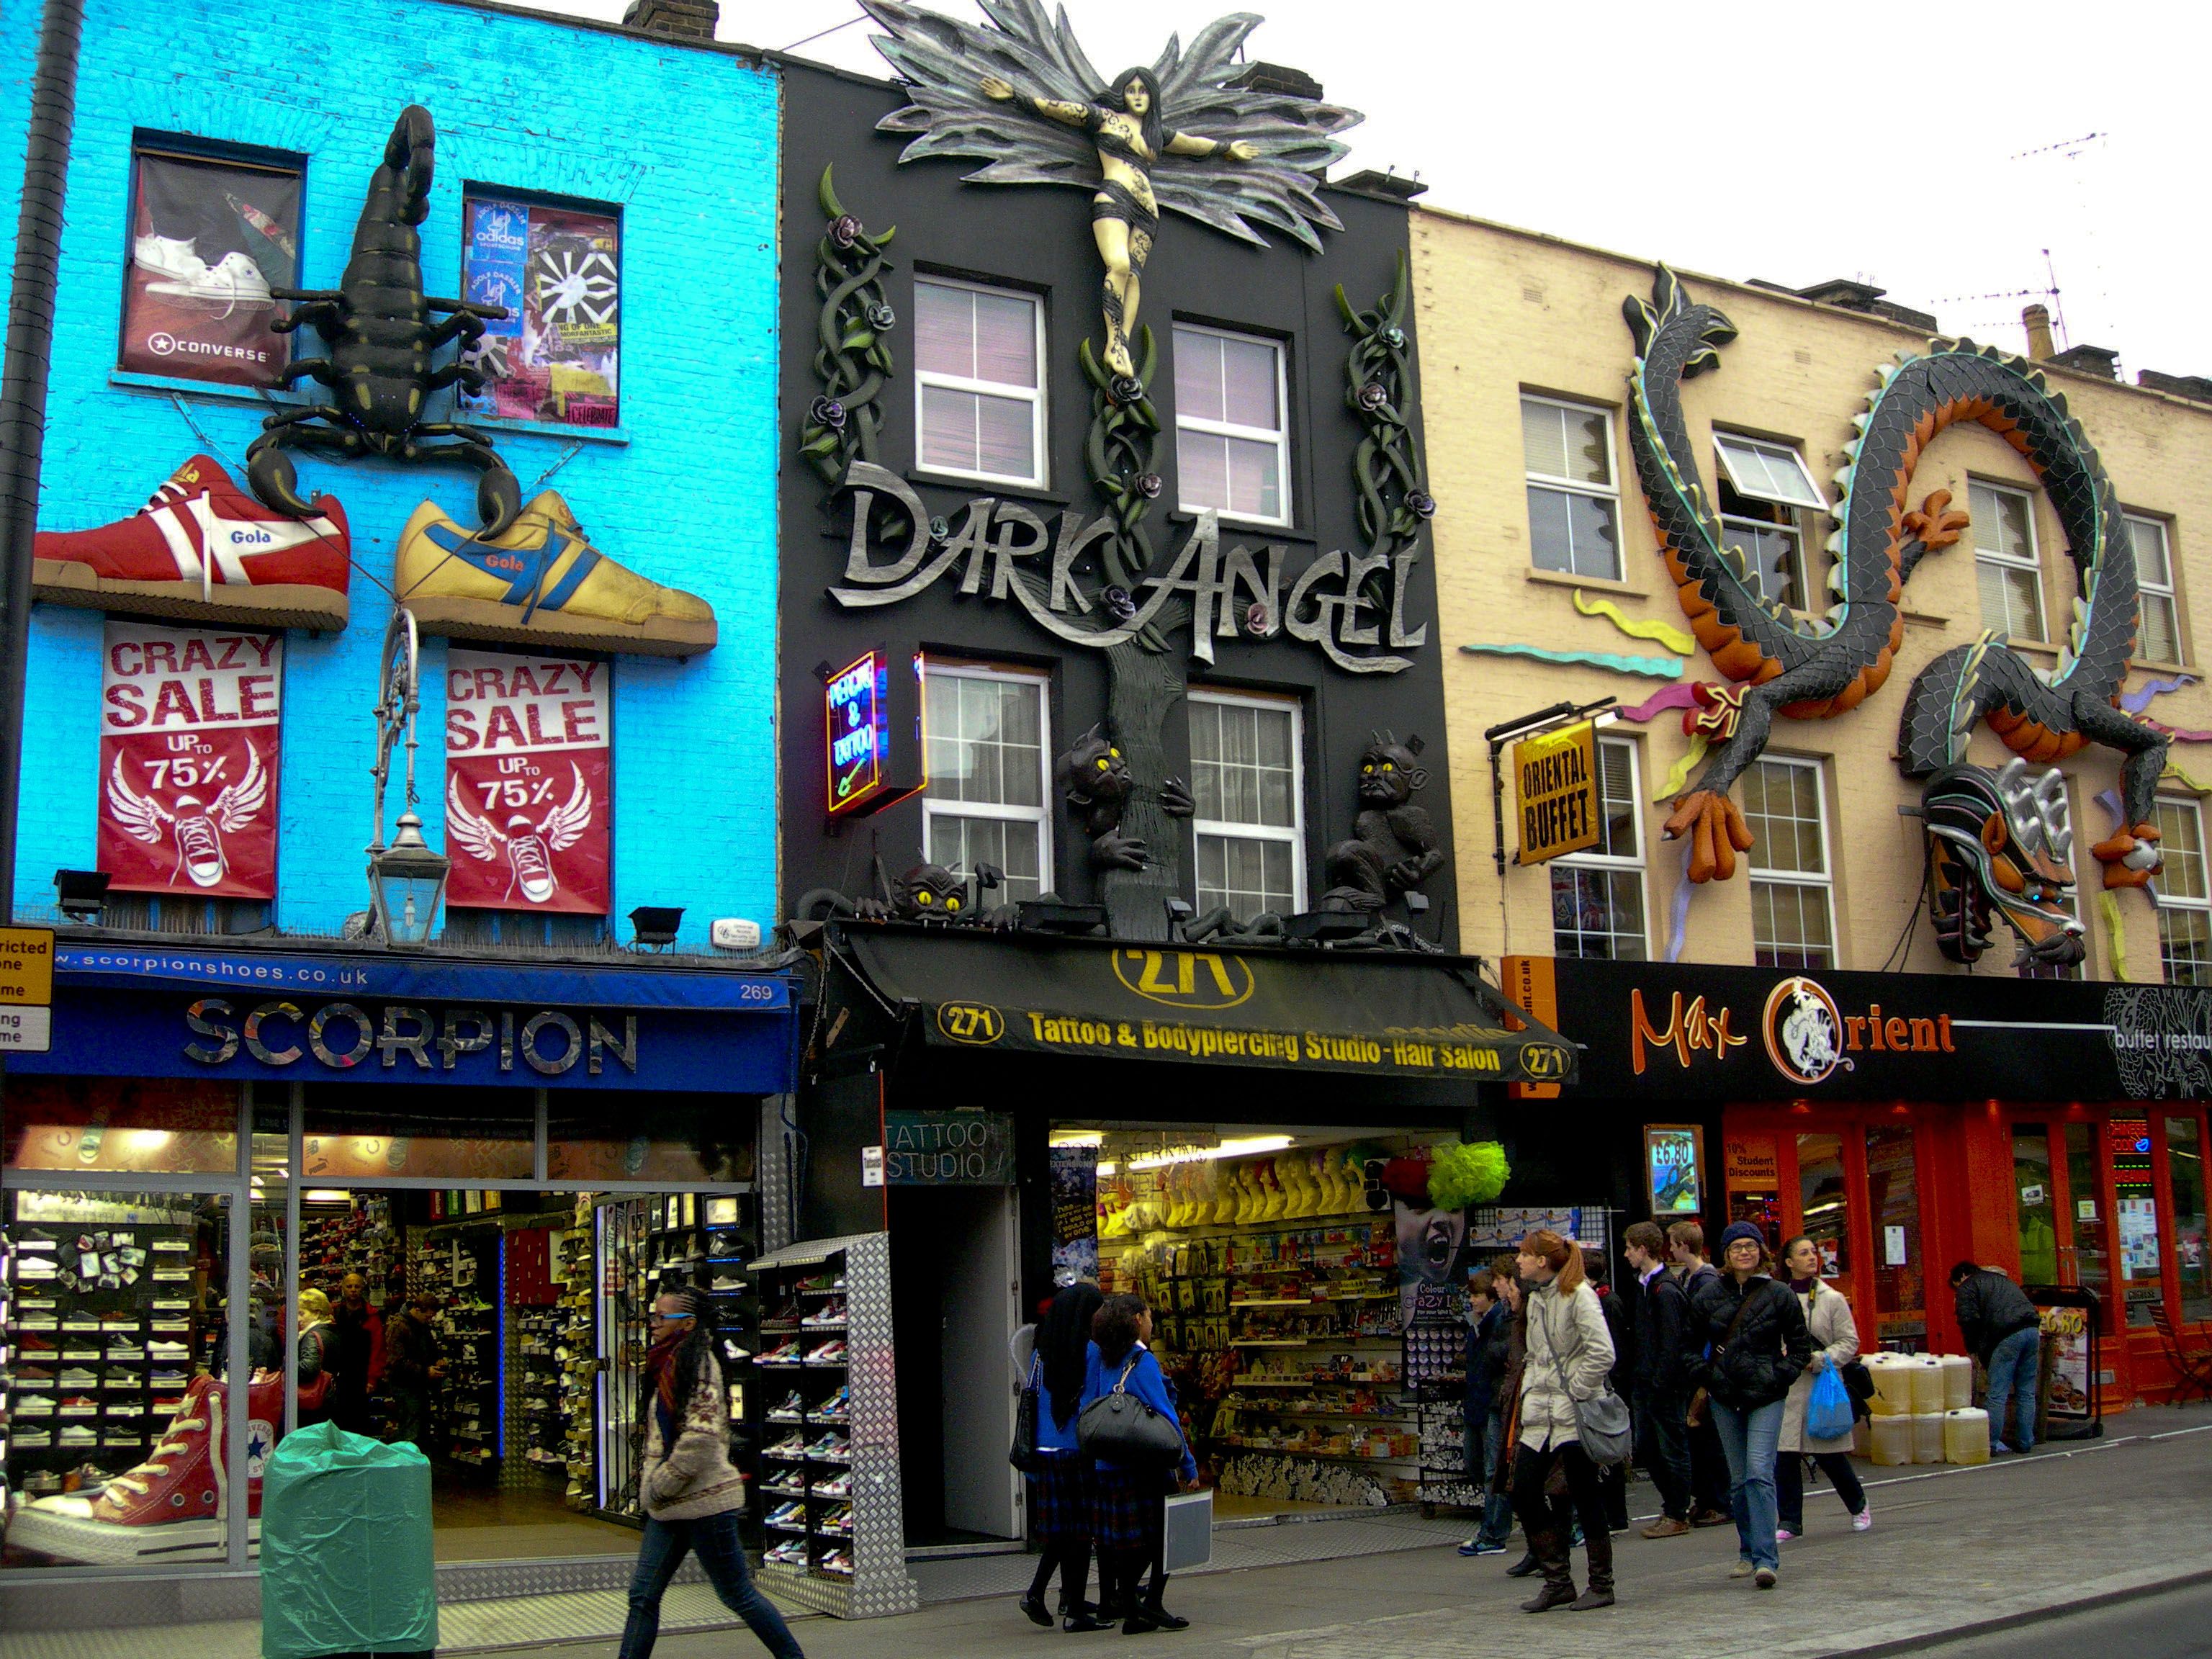 Camden Town | Places I'd Like to Go | Pinterest | Camden and Park